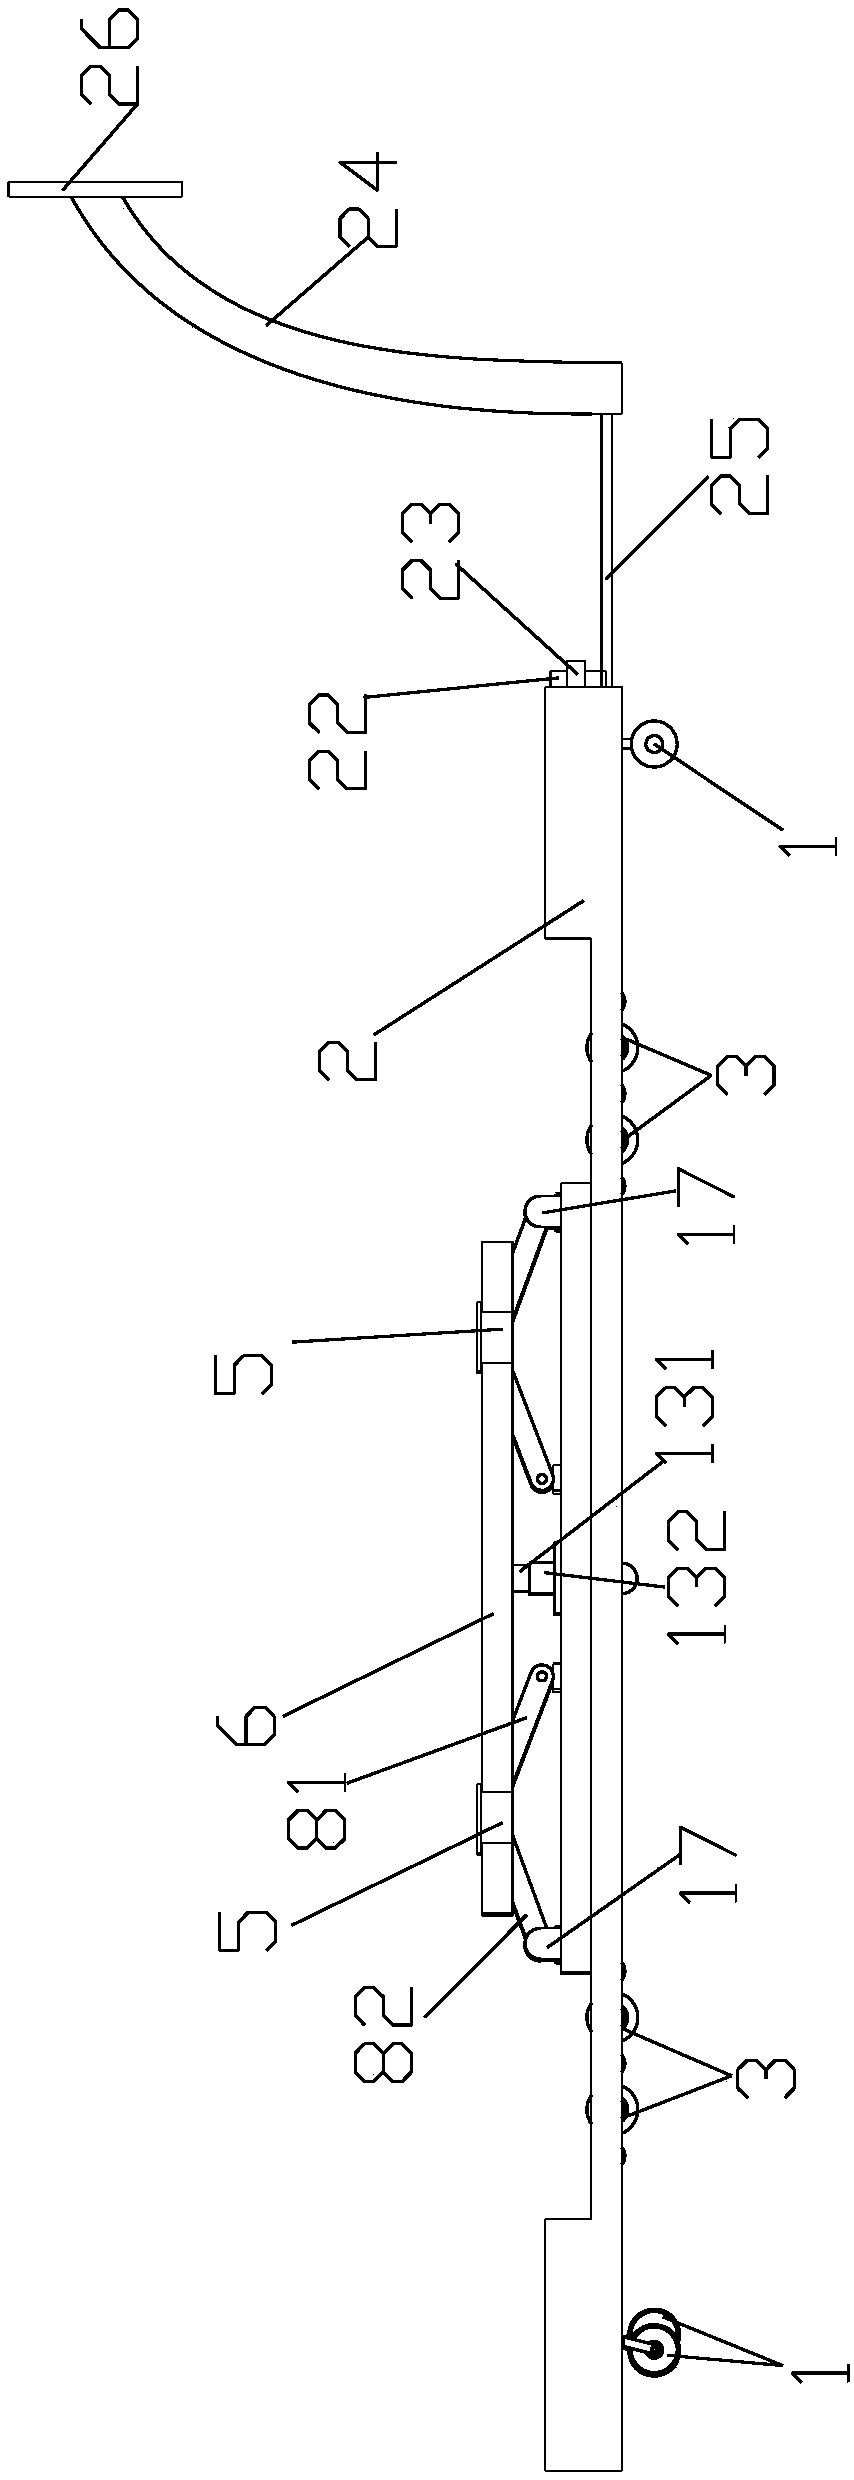 Flat-plate type parking assistance device